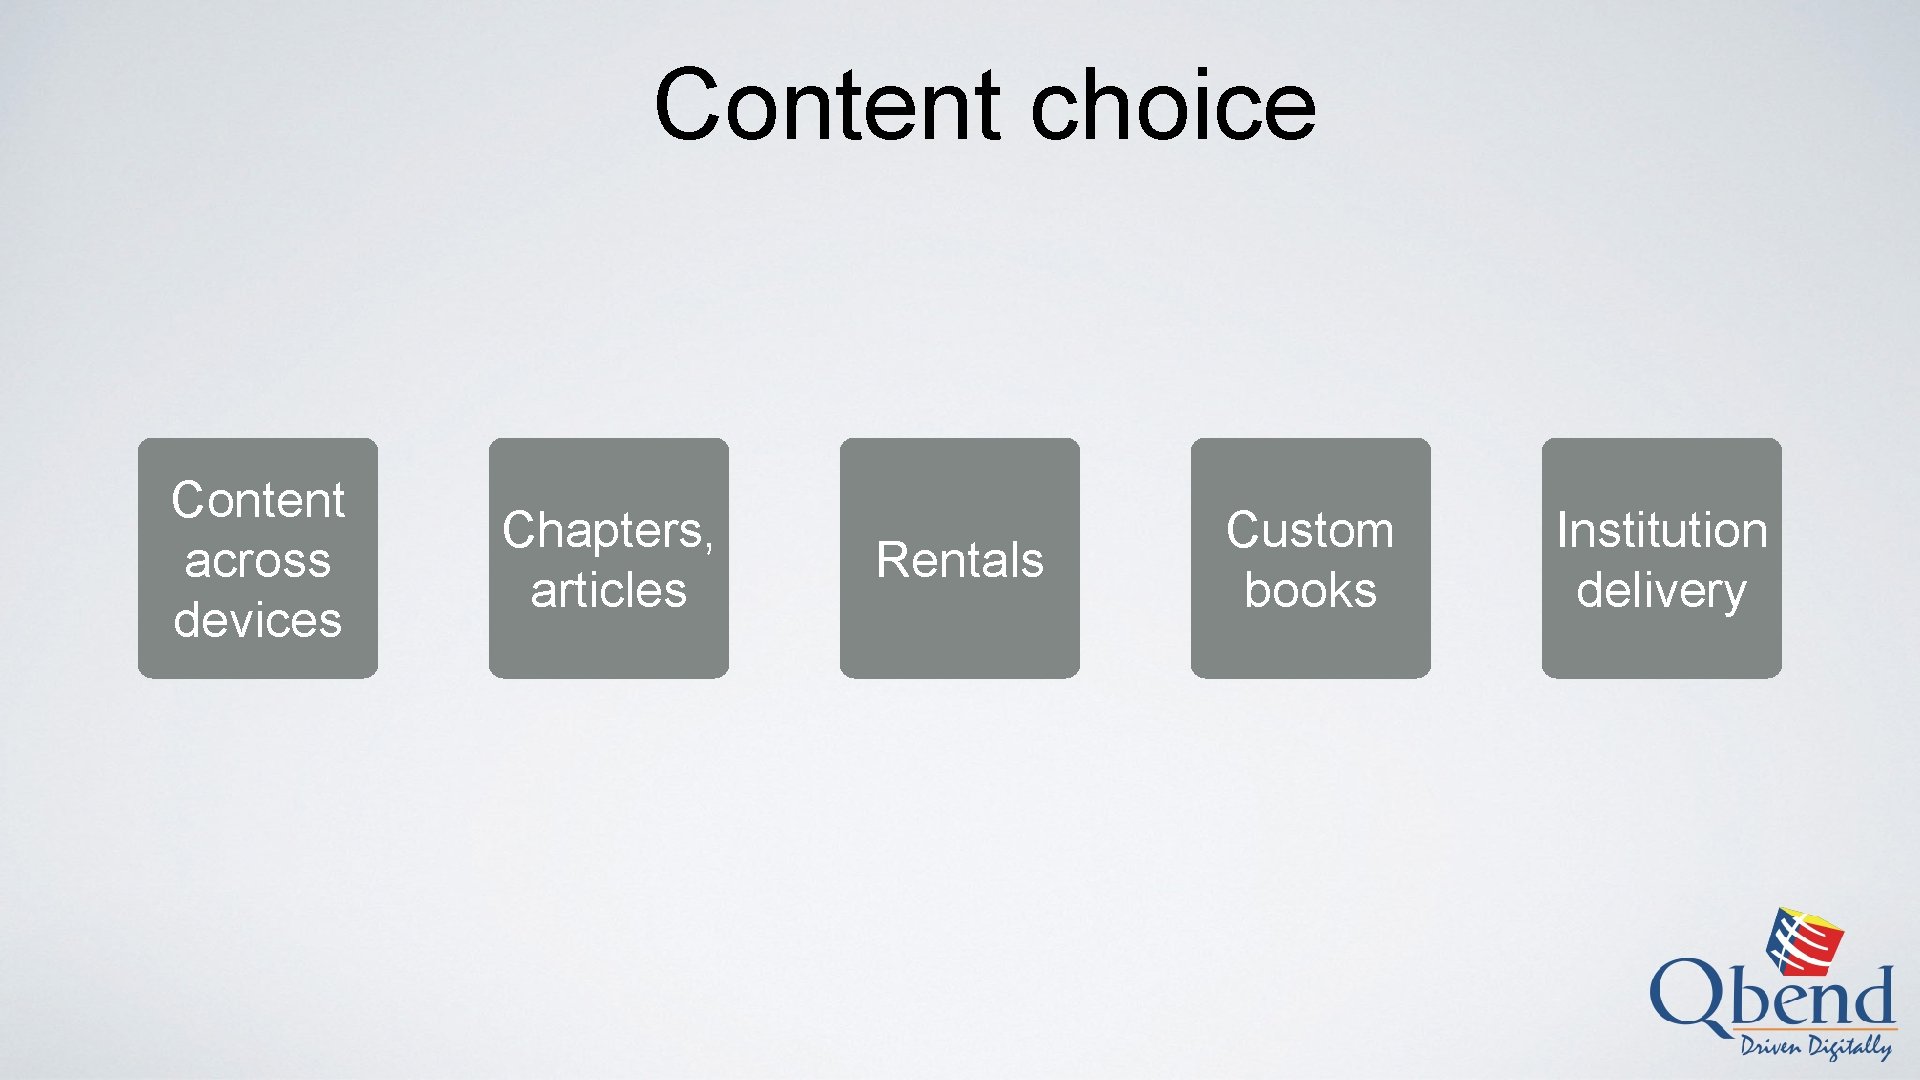 Content choice Content across devices Chapters, articles Rentals Custom books Institution delivery 